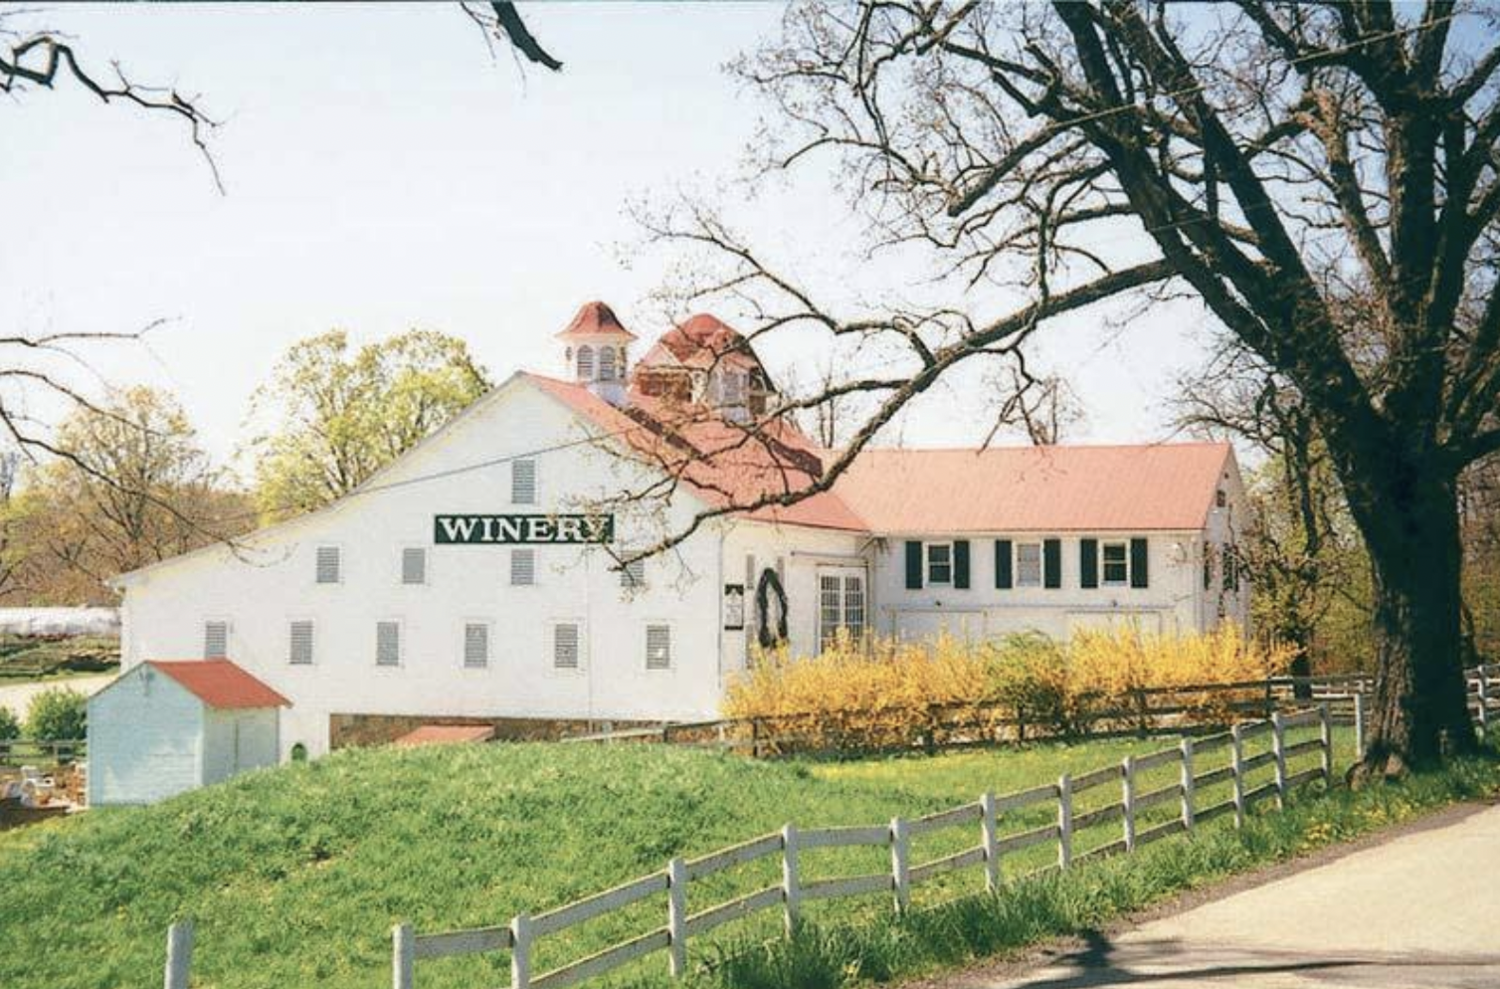 The exterior of Christian Klay Winery. A white barn looking building with a red roof. In front sits a large fenced in yard. 